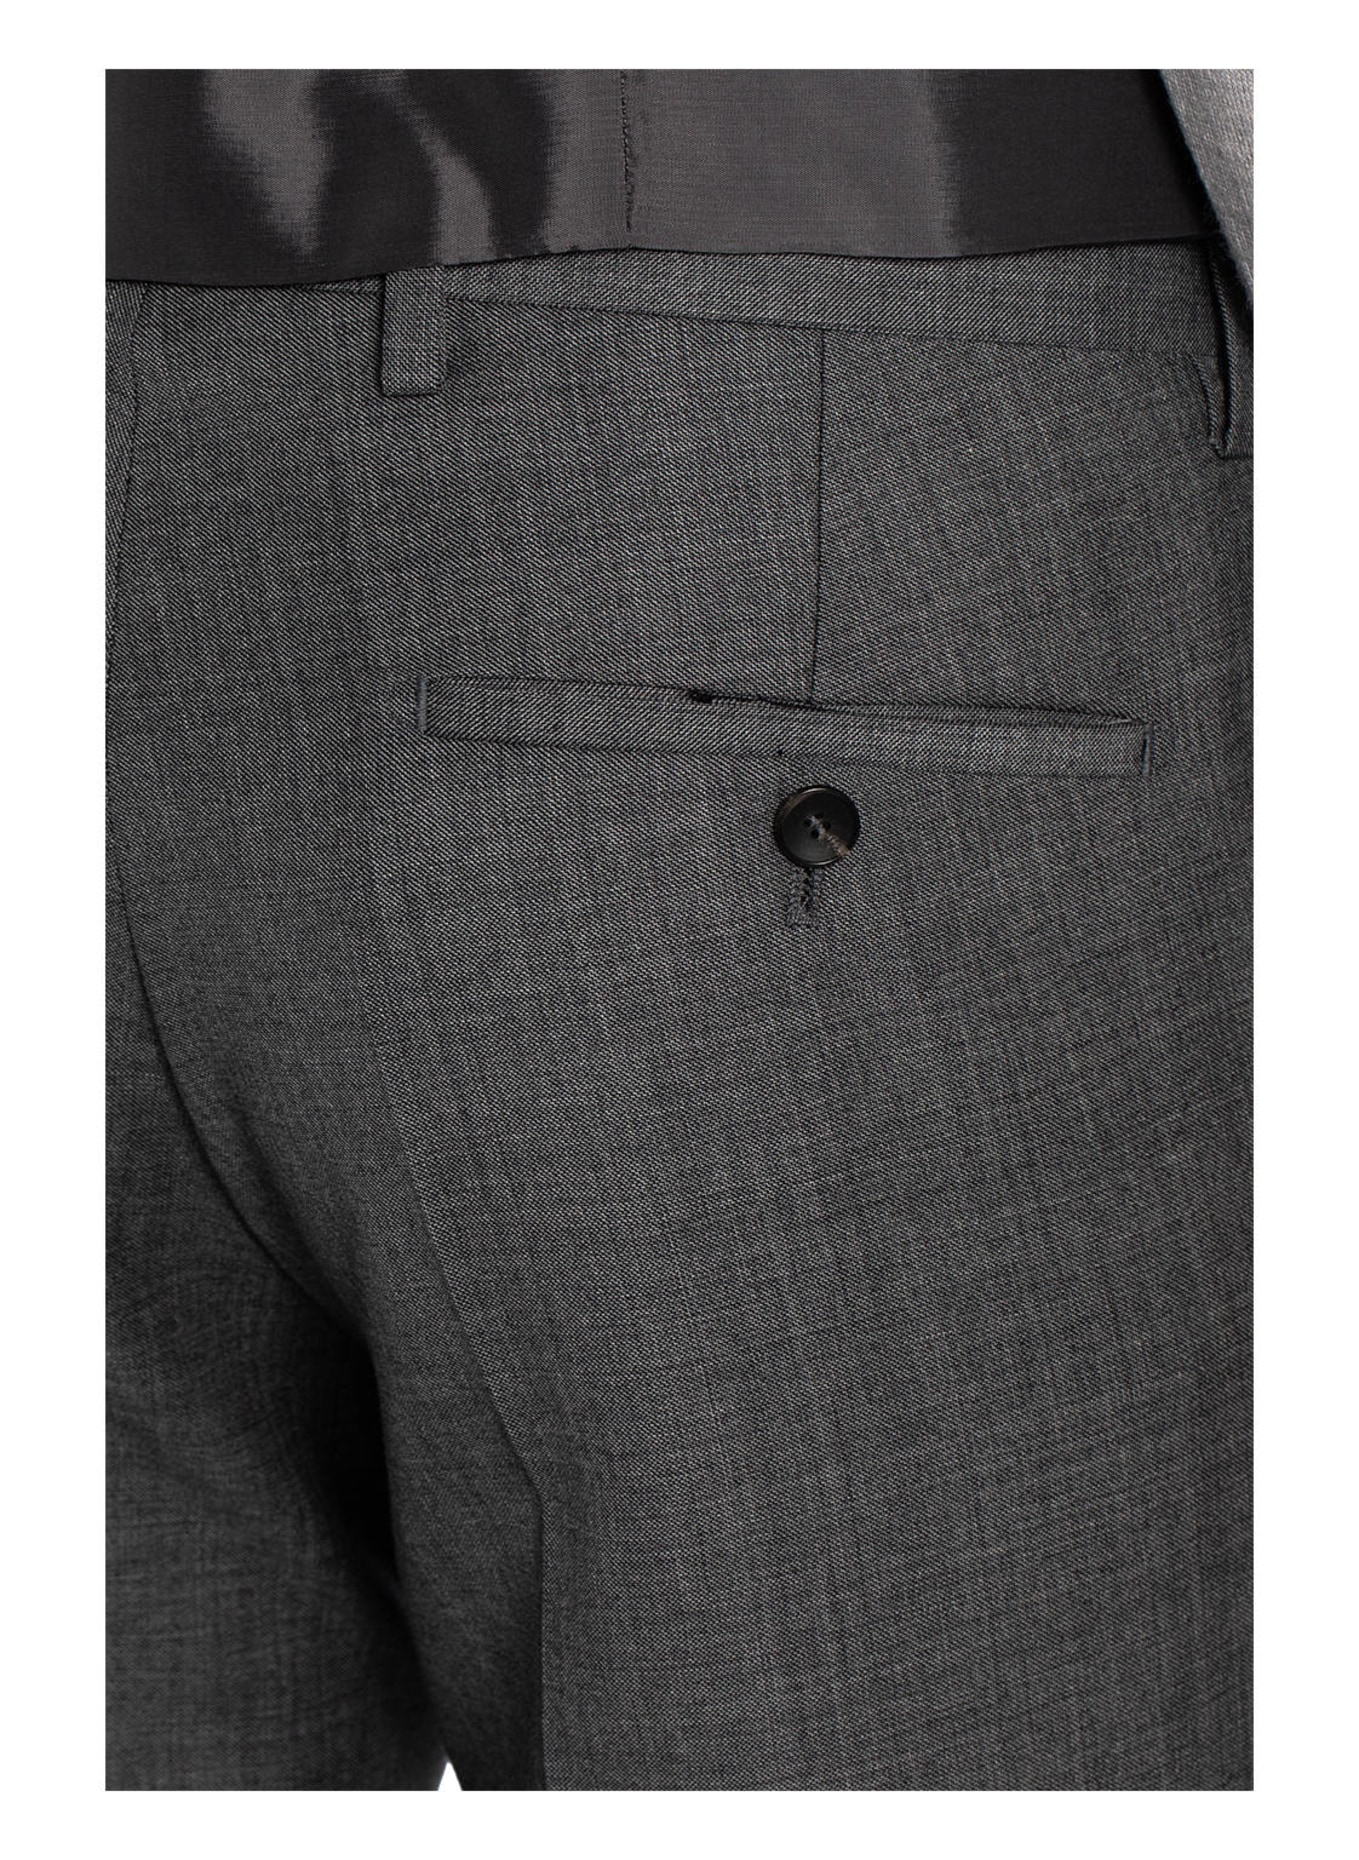 CG - CLUB of GENTS Suit trousers CHAZ regular fit, Color: 81 grau hell (Image 6)